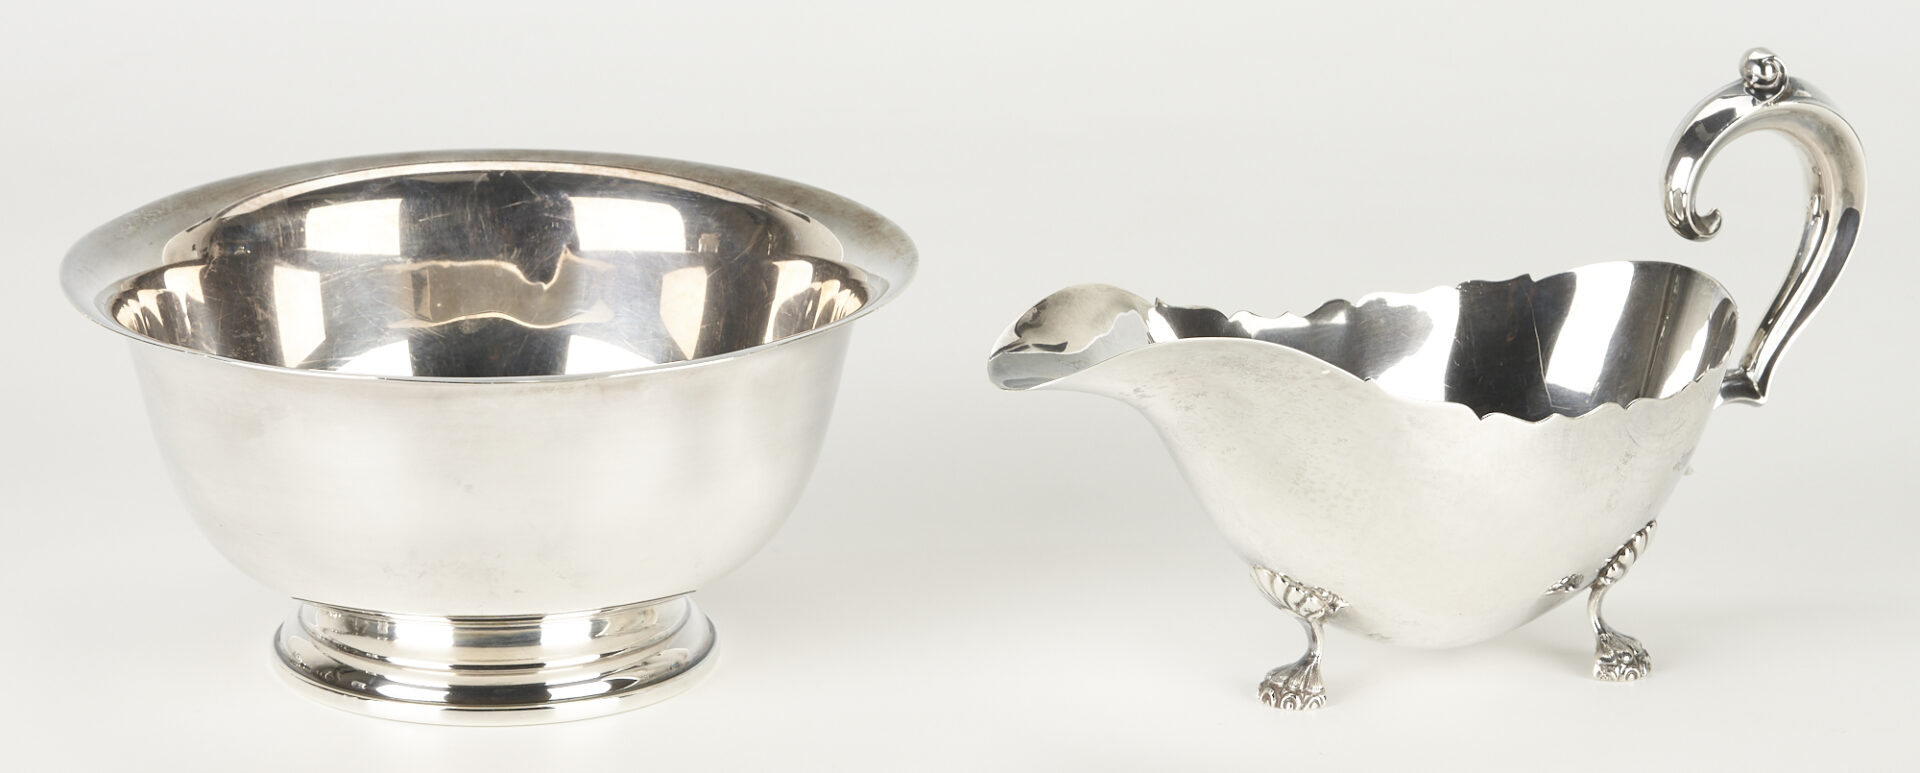 Lot 733: 6 Sterling Silver Hollowware Serving Items